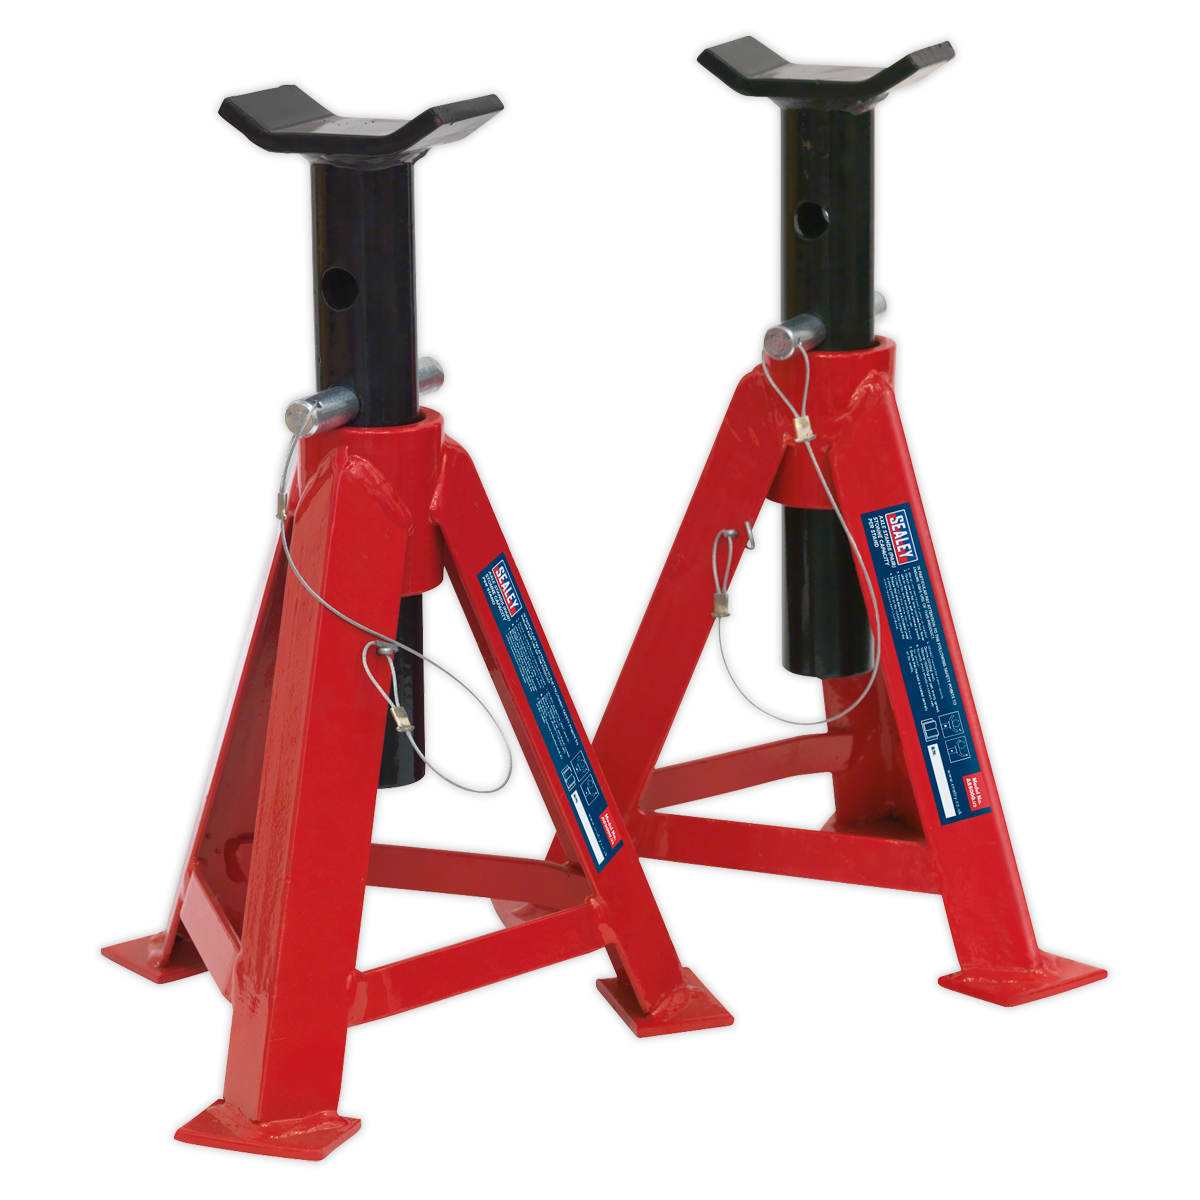 Axle Stands (Pair) 5 Tonne Capacity per Stand - AS5000 - Farming Parts